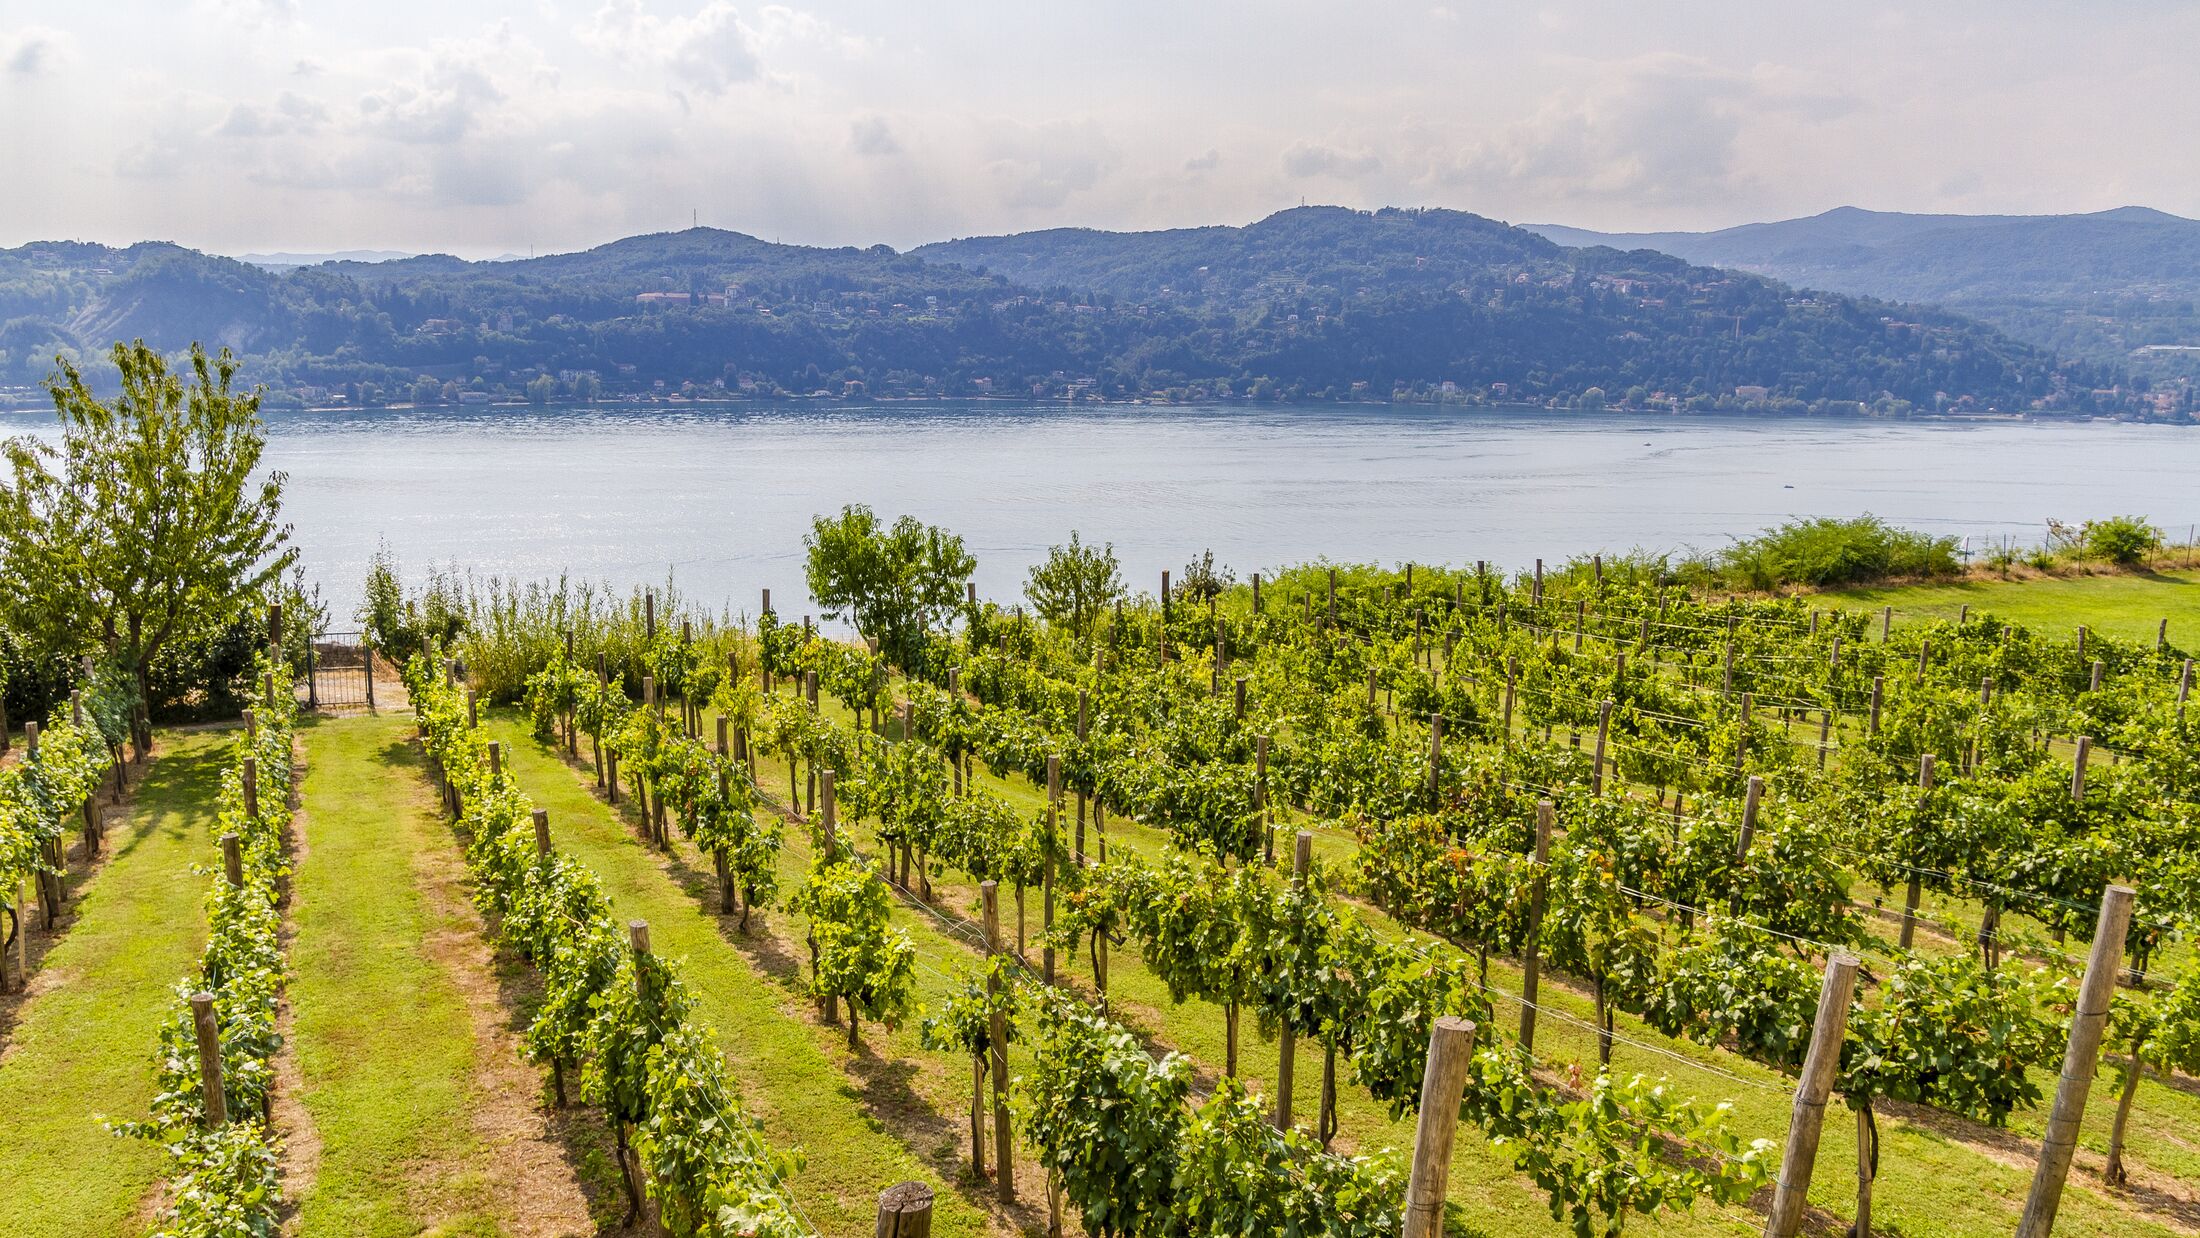 Vineyard at fortress of Angera with view of the lake Maggiore